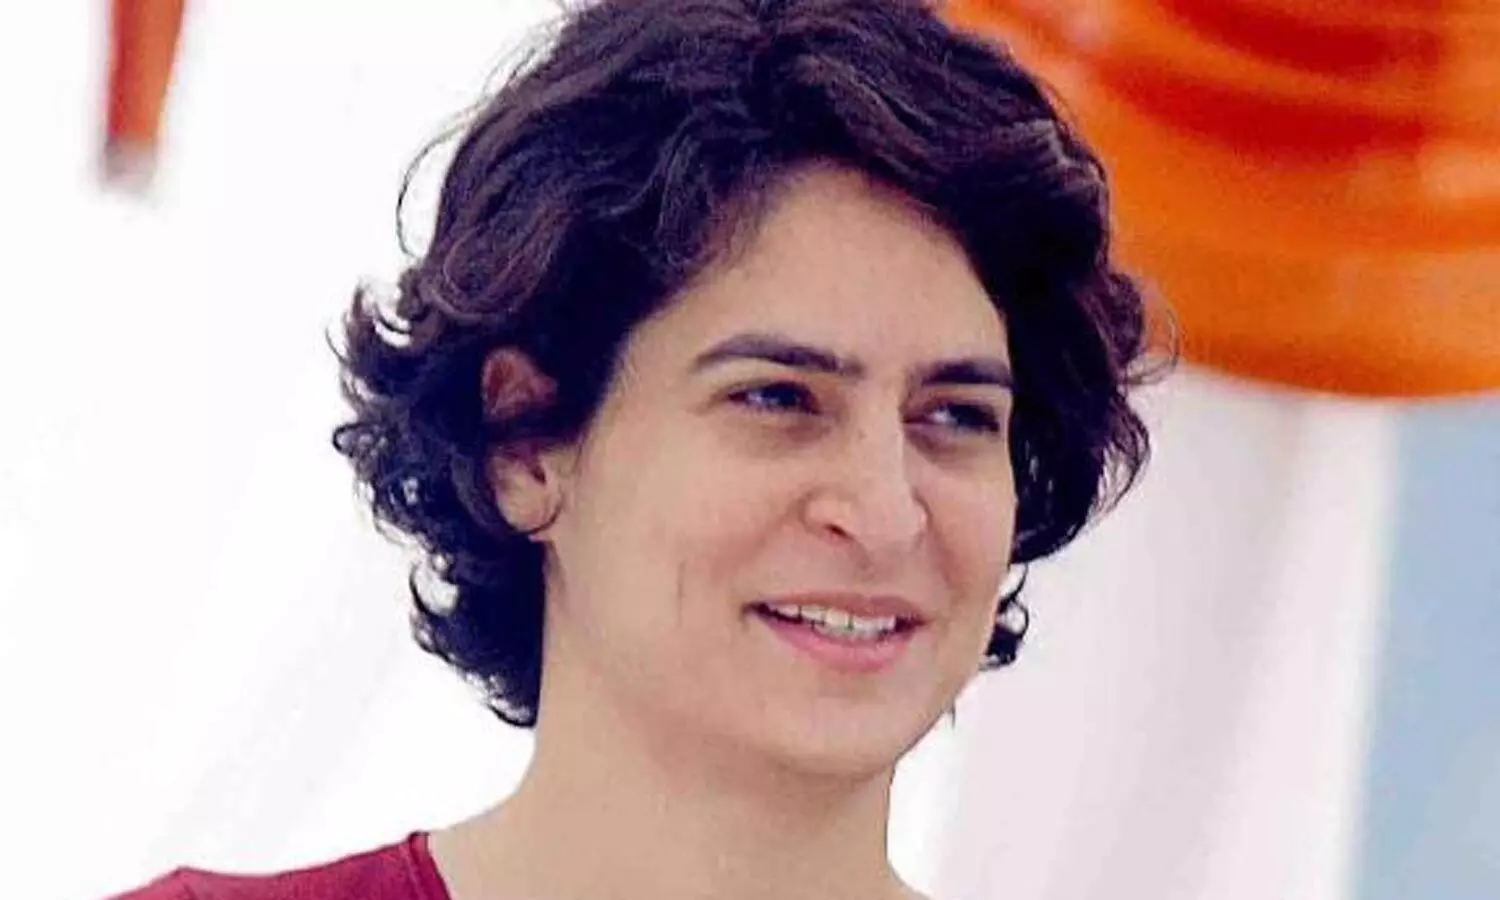 UP Decision to start MBBS classes amid COVID can jeopardize their safety: Priyanka Gandhi